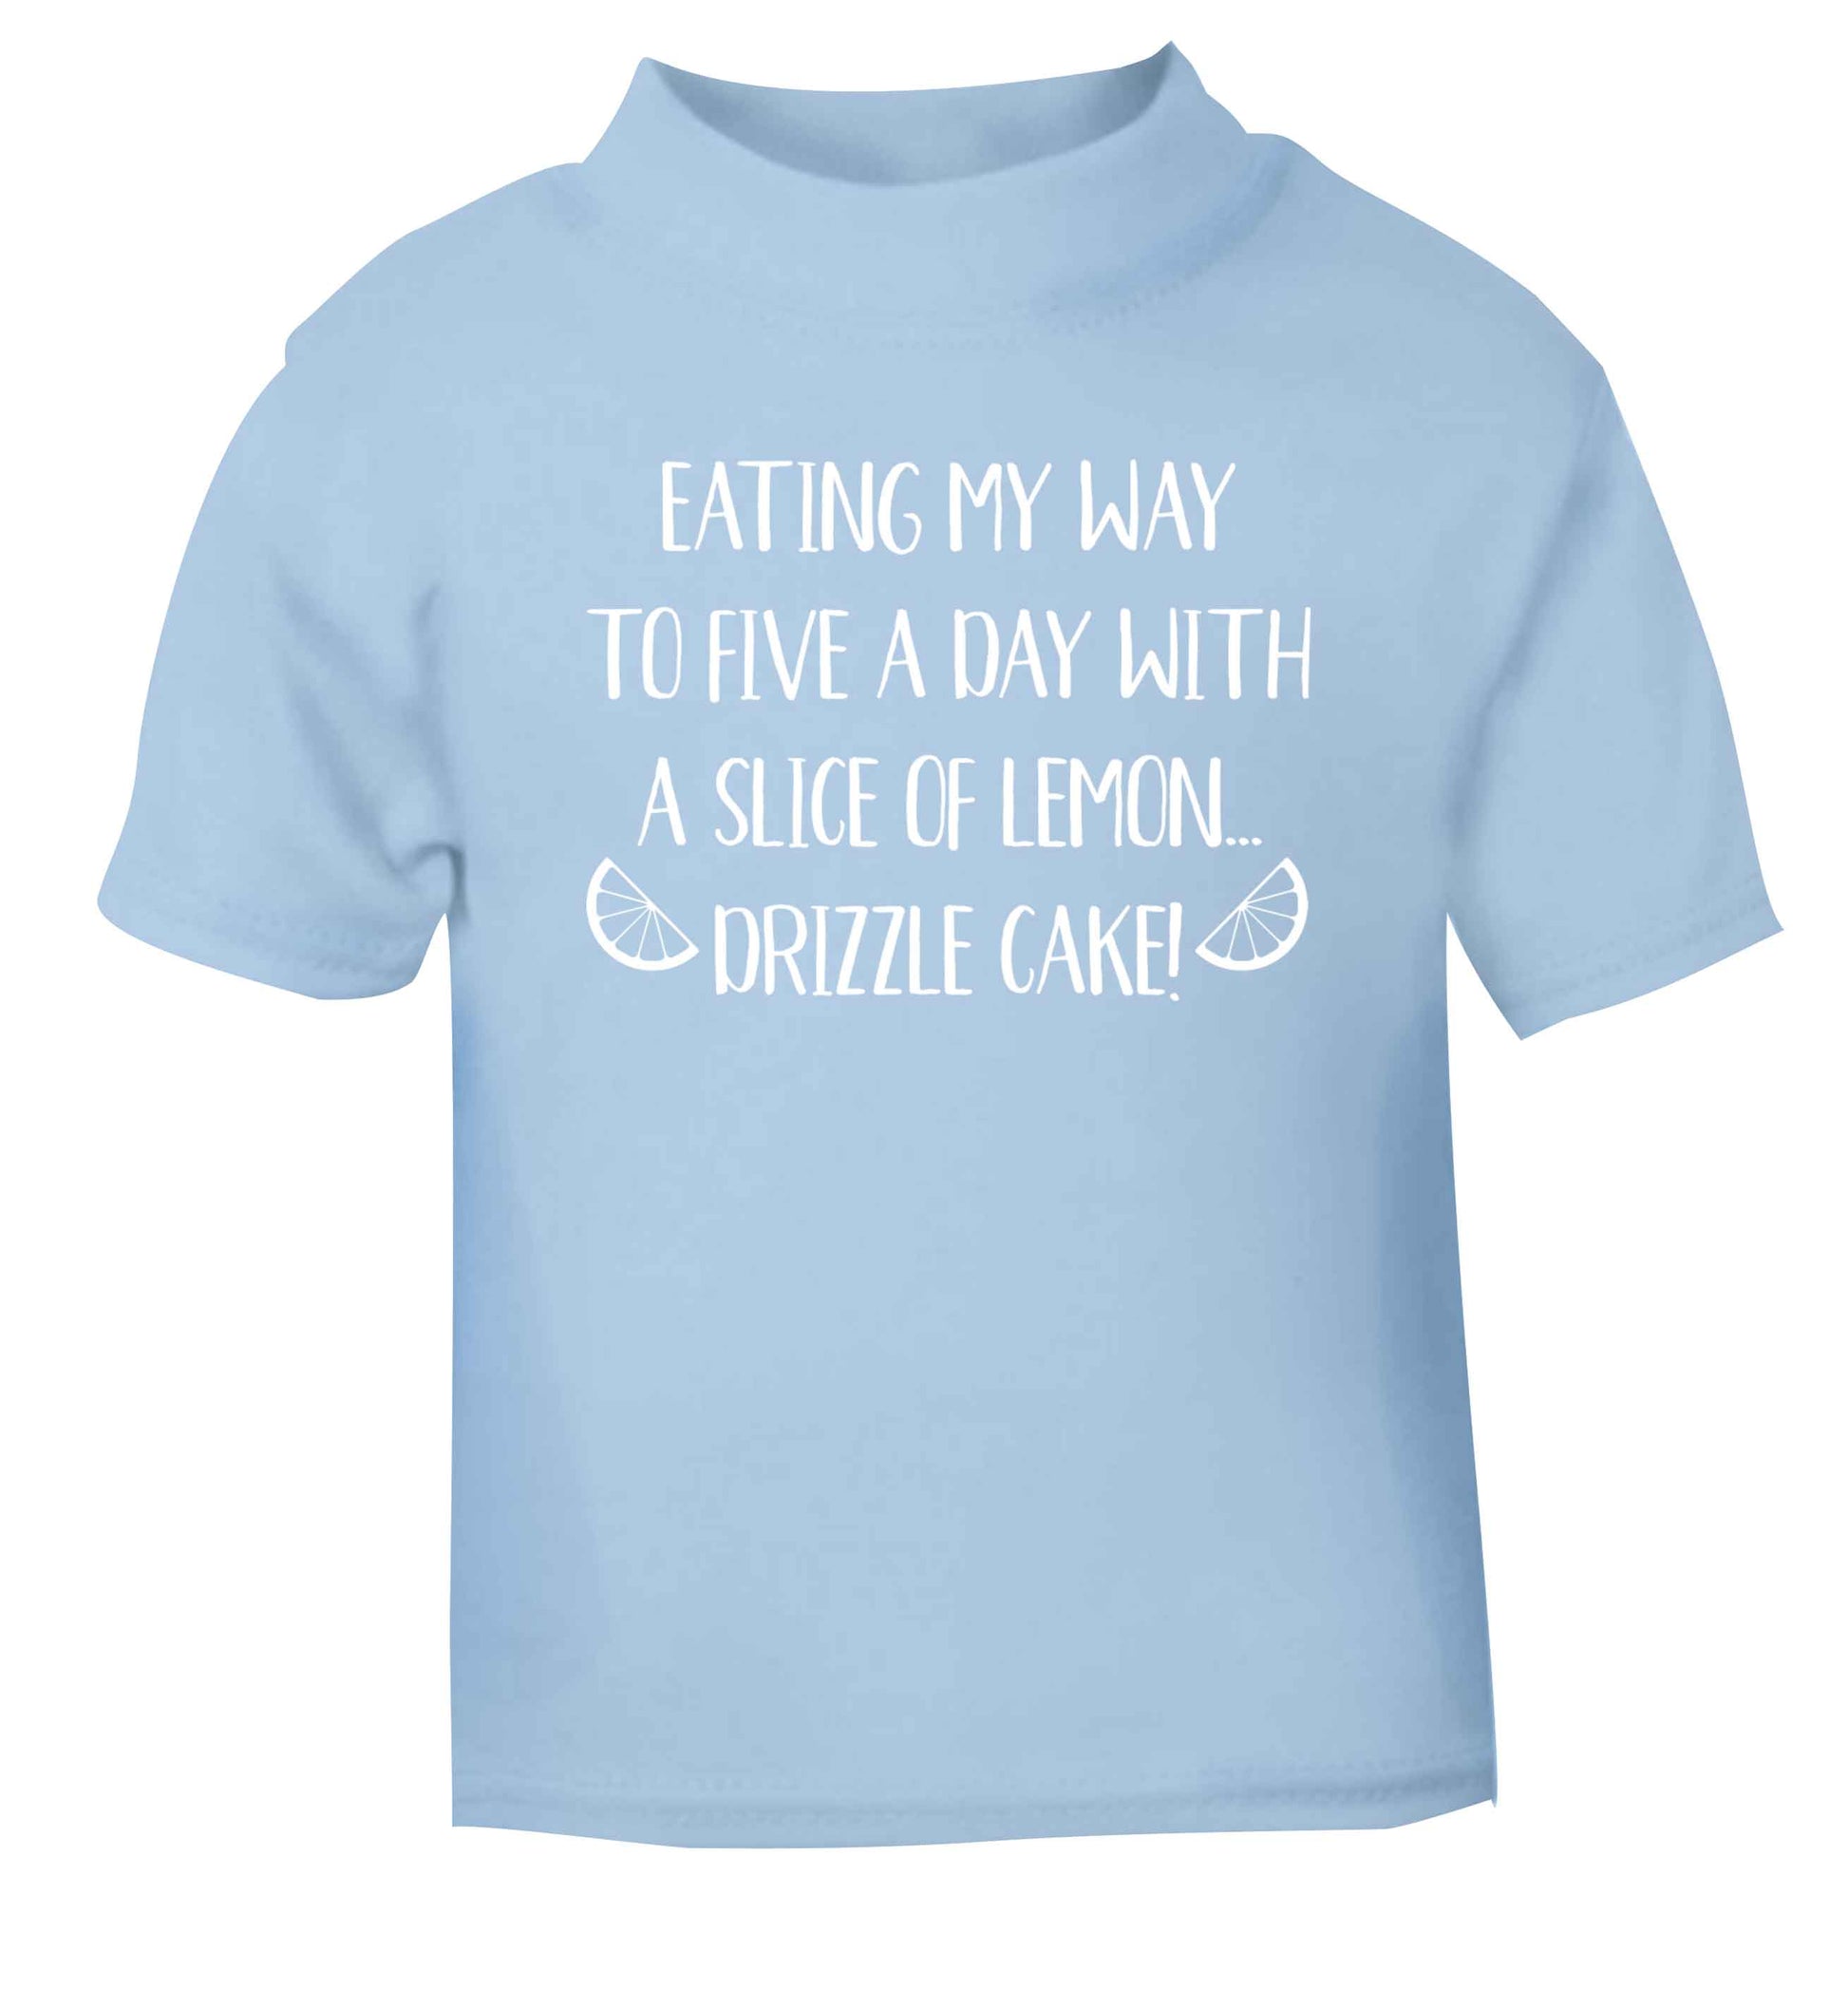 Eating my way to five a day with a slice of lemon drizzle cake day light blue Baby Toddler Tshirt 2 Years